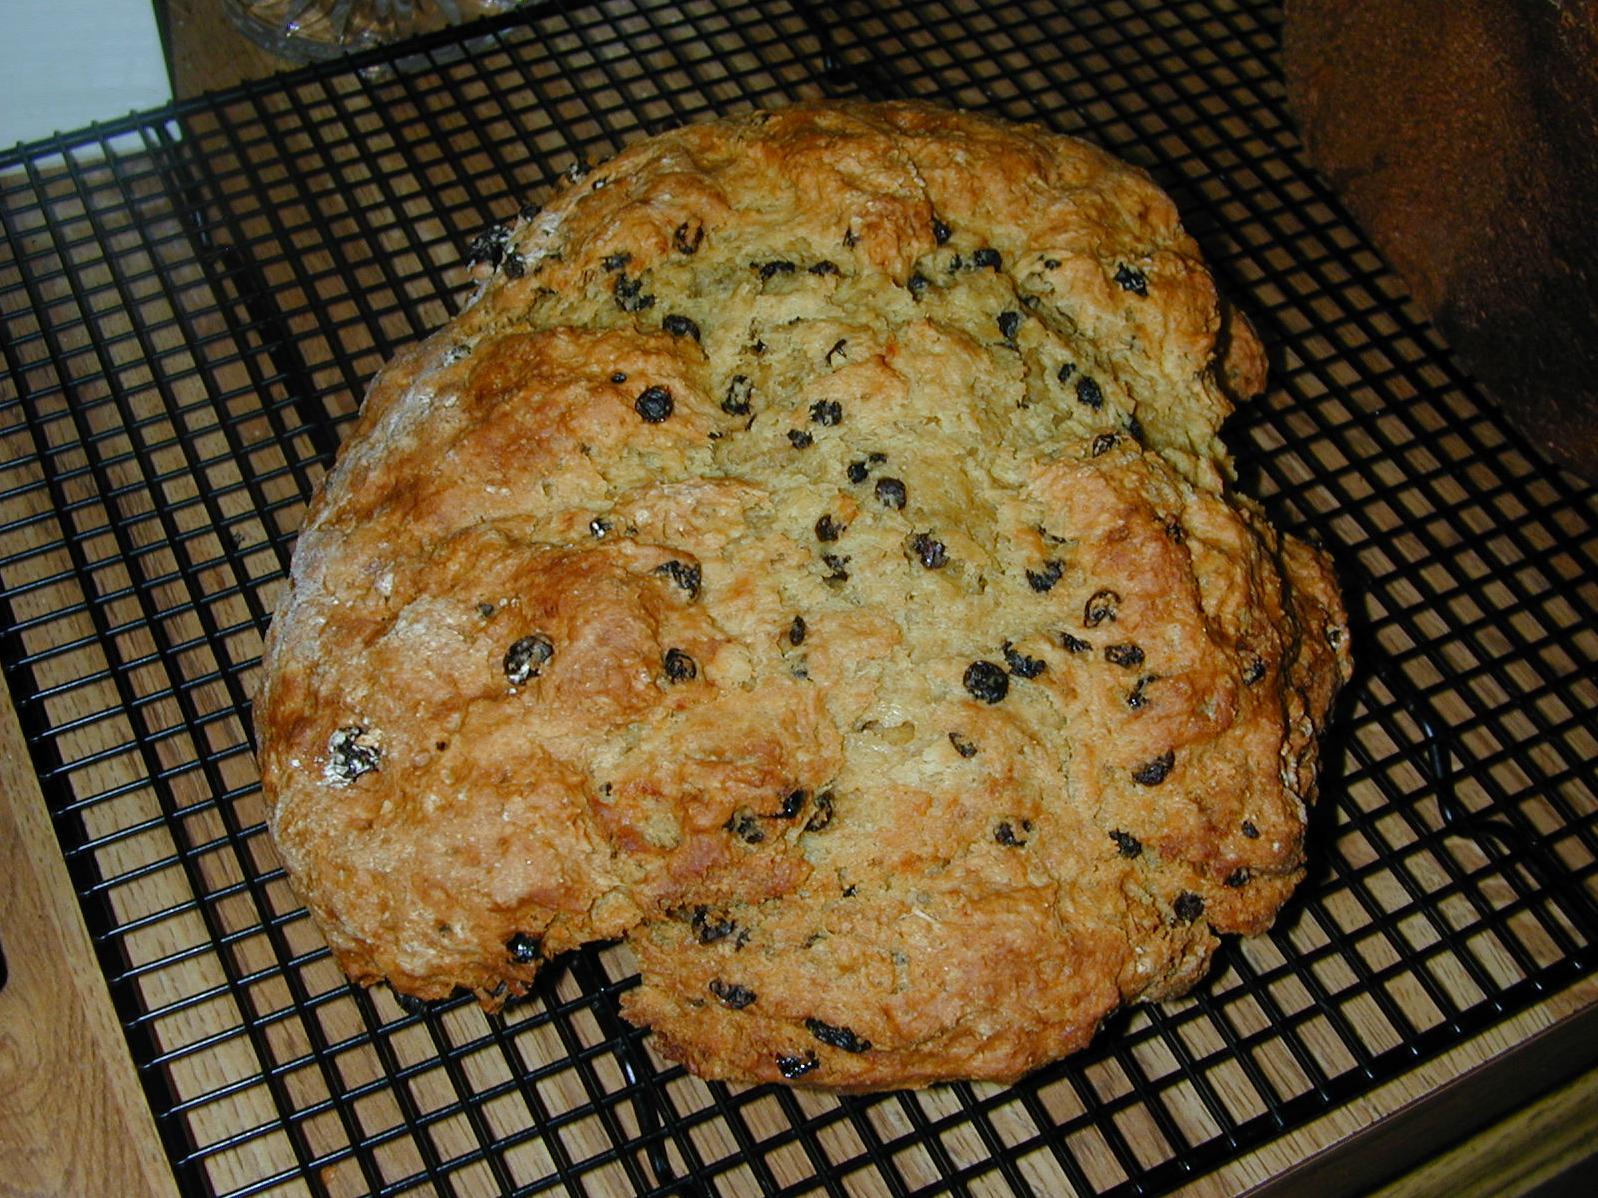  Experience a taste of Ireland with this authentic soda bread recipe.